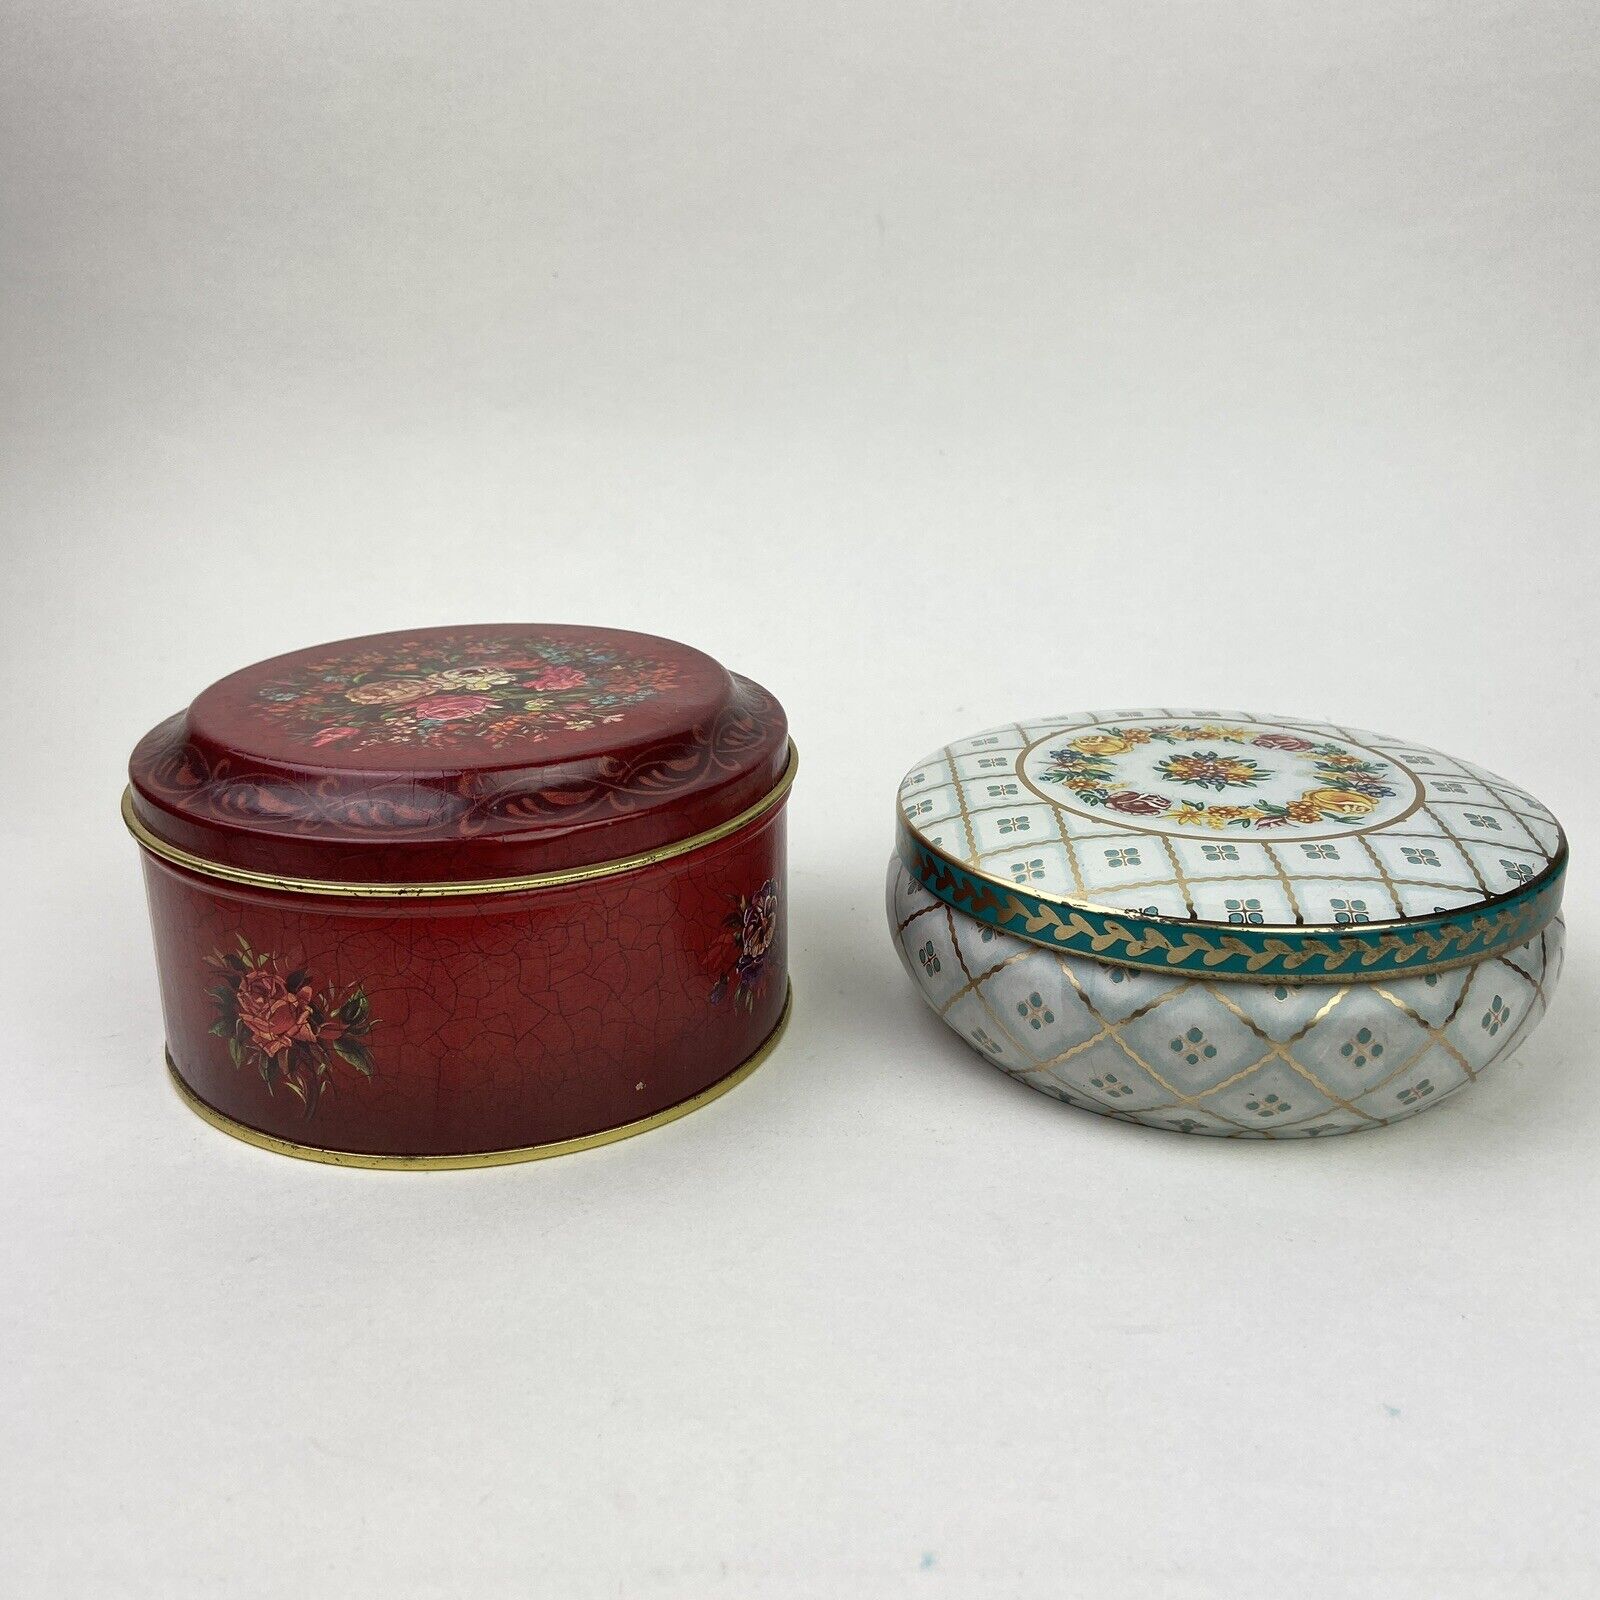 Lot of 2 Vtg Round Empty Tins Made In England Daher & Case Red White Flowers